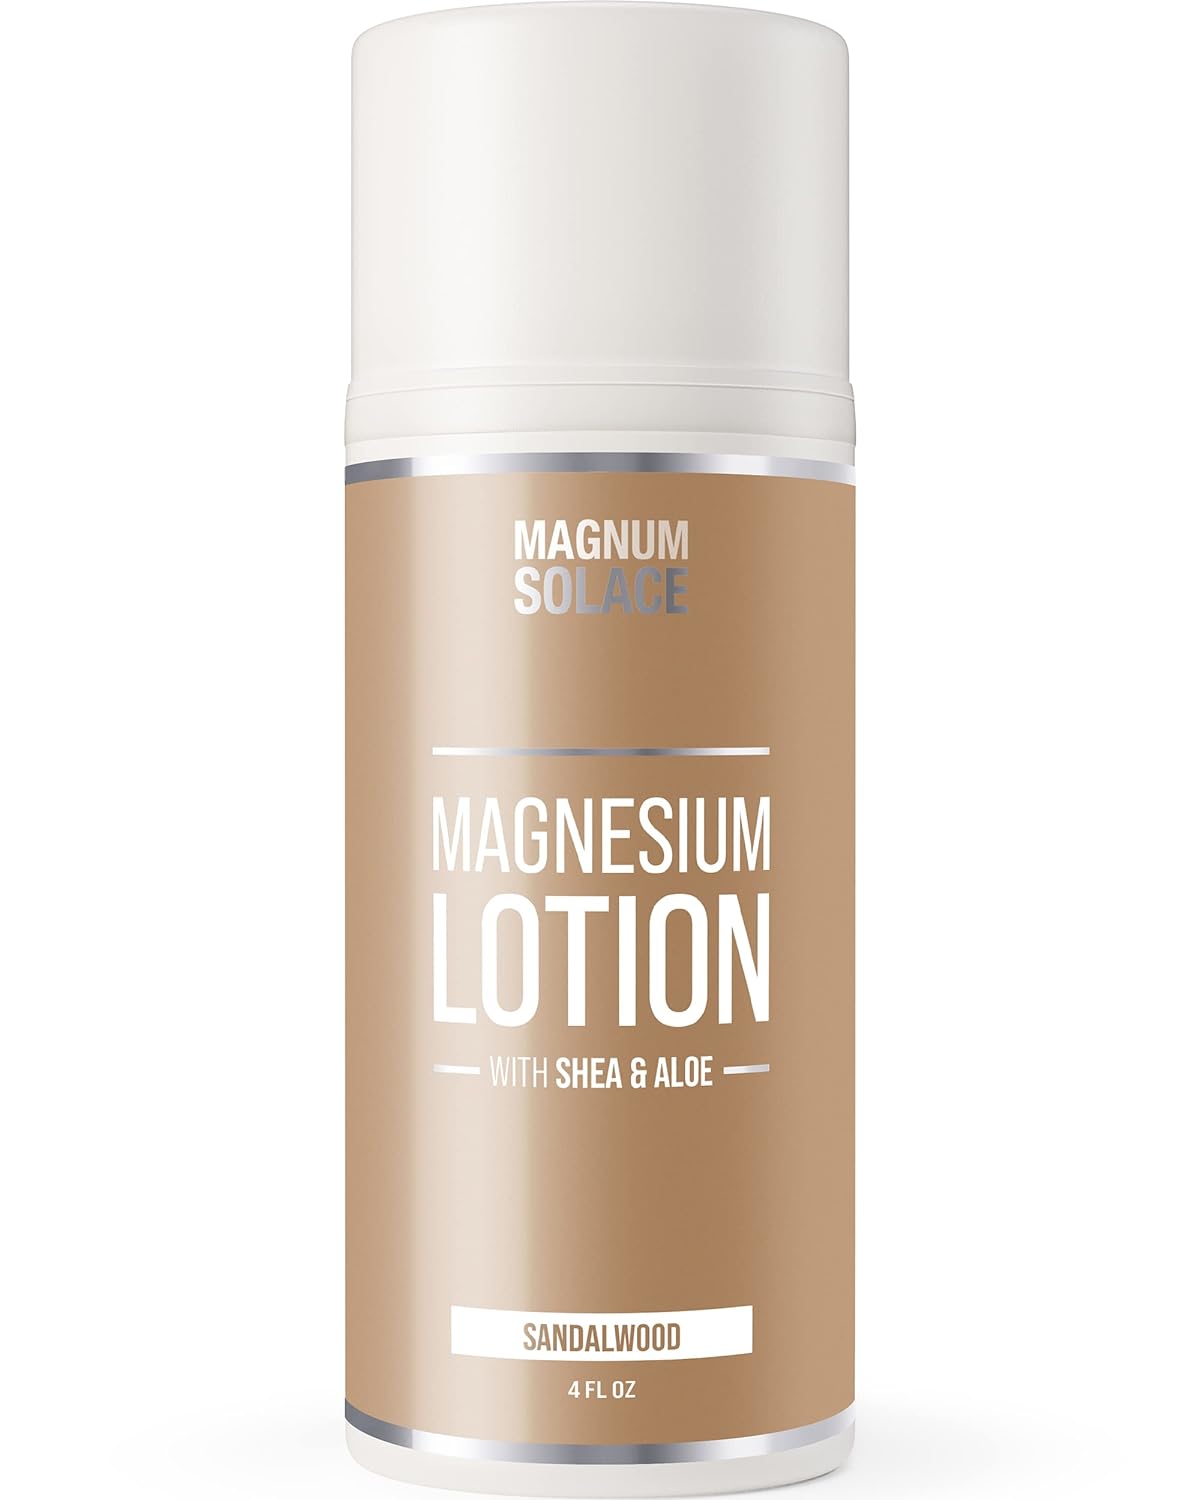 Magnesium Lotion for Joint & Muscle Relief, Sleepless Legs